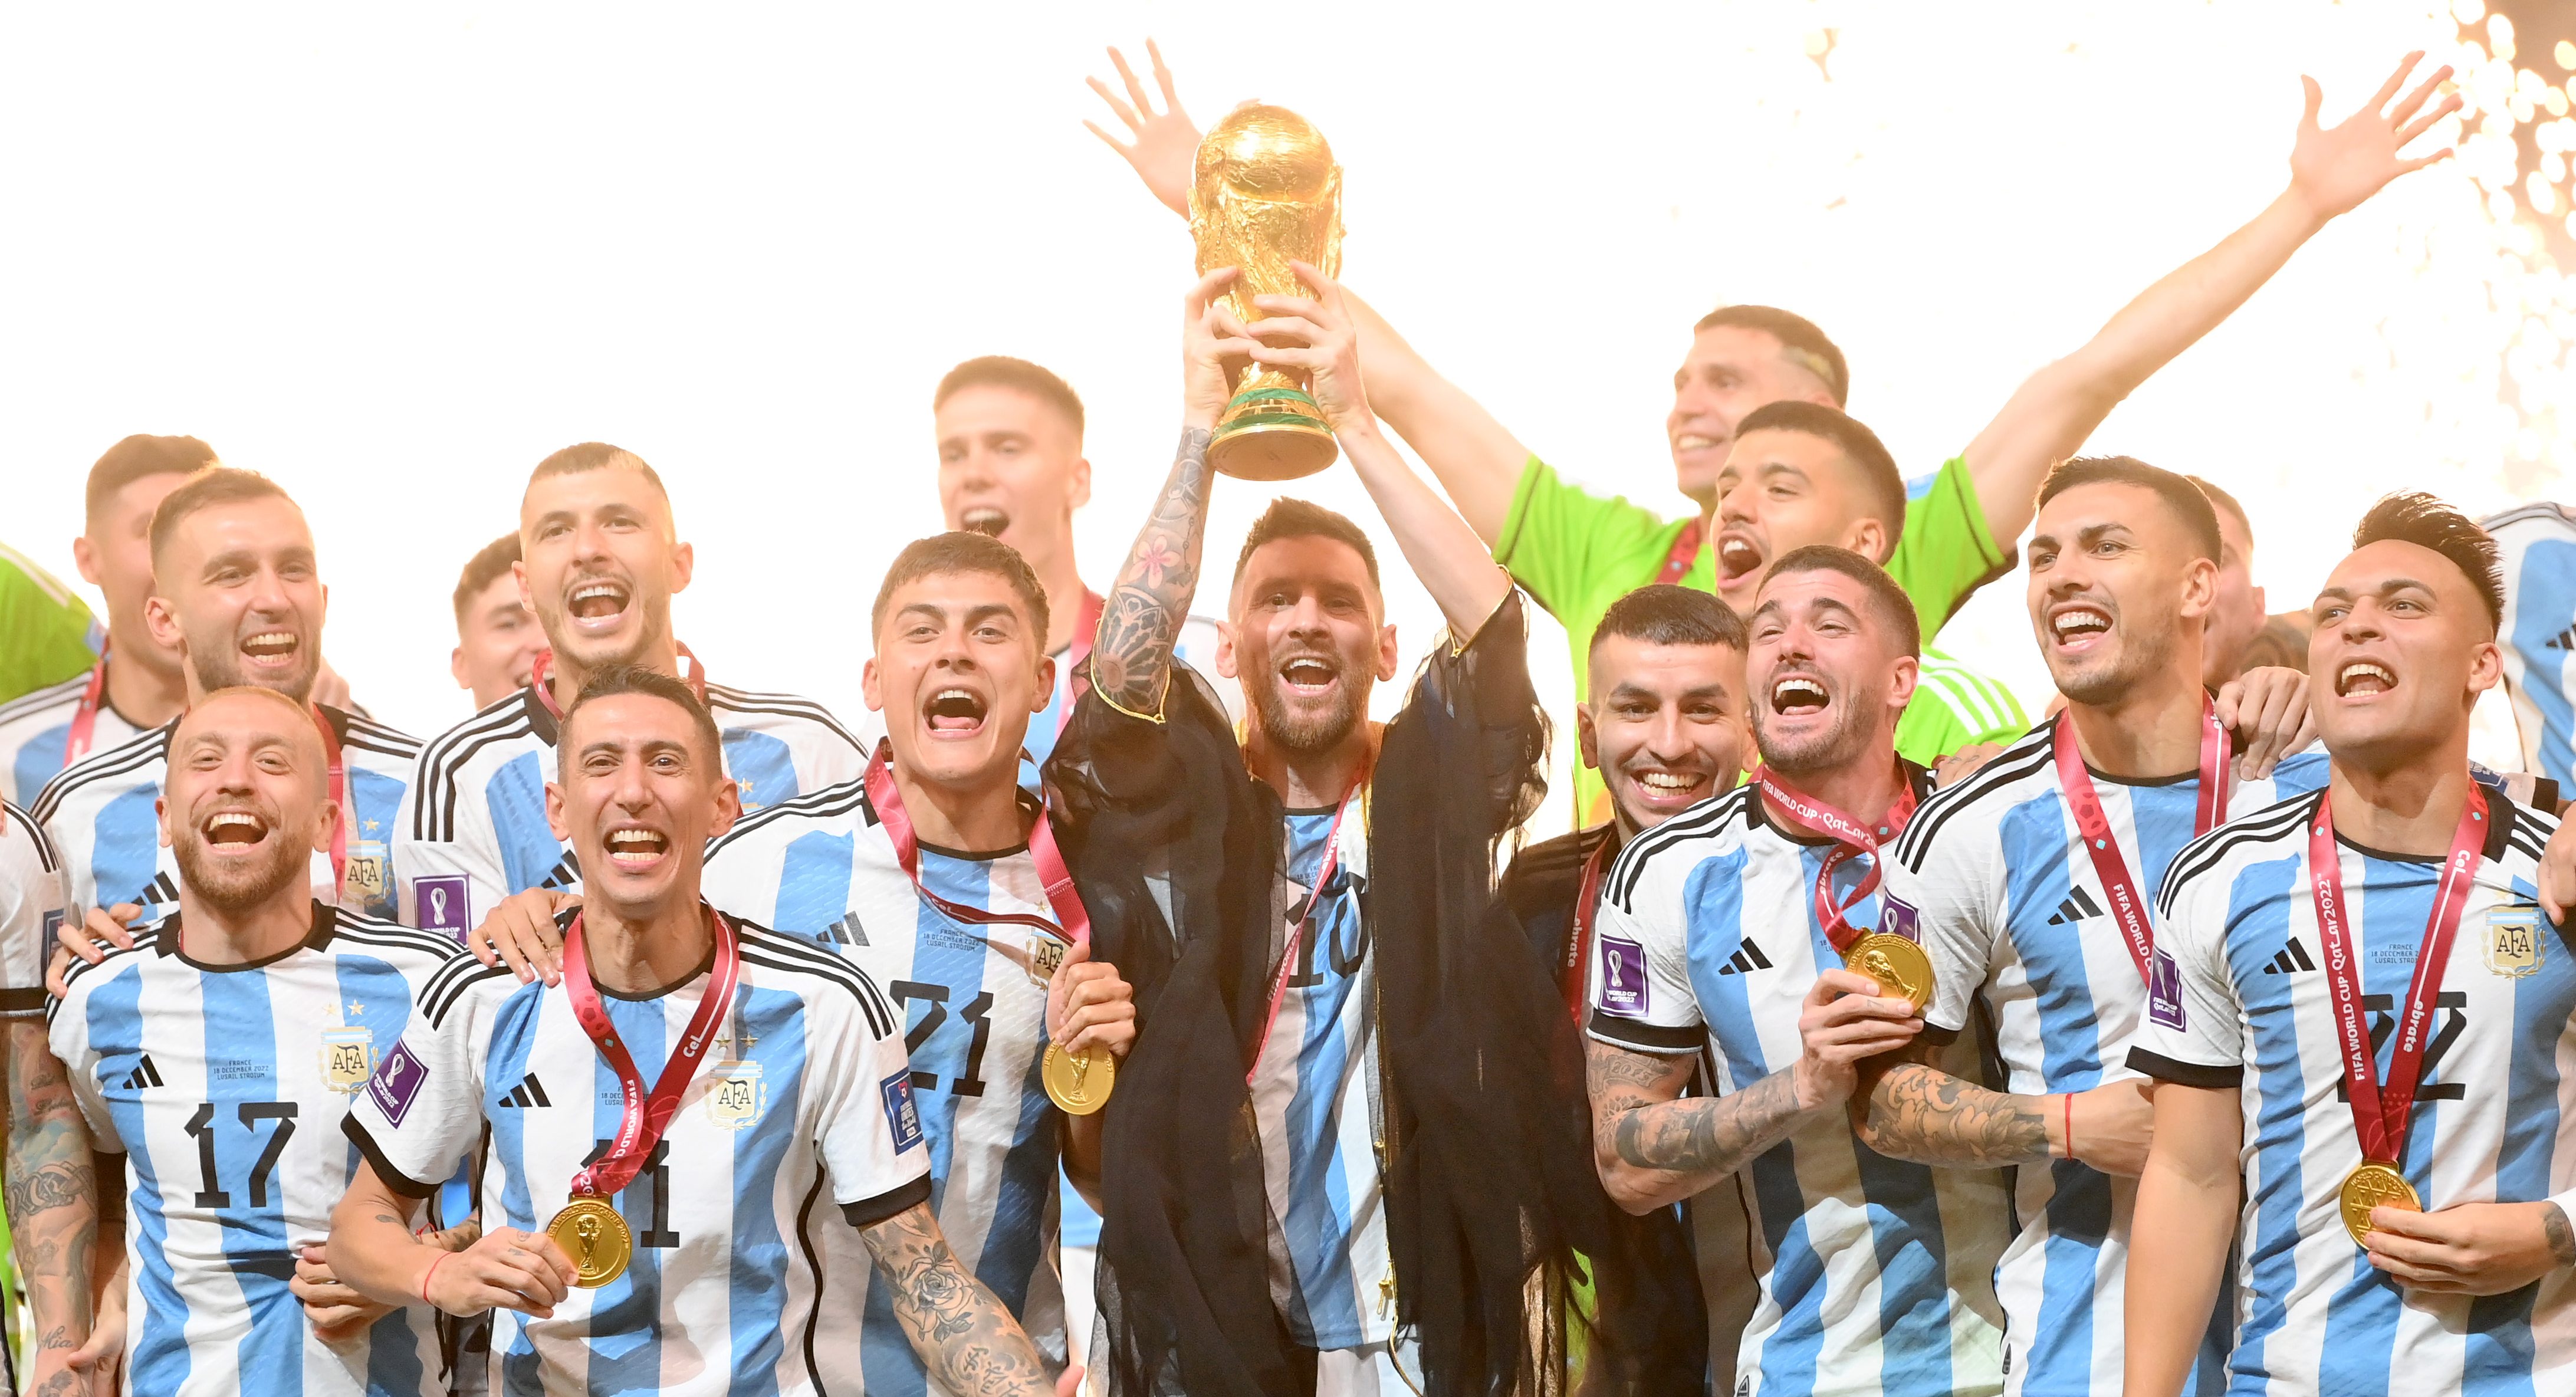 Lionel Messi, Argentina Survive France Comebacks to Win 2022 World Cup